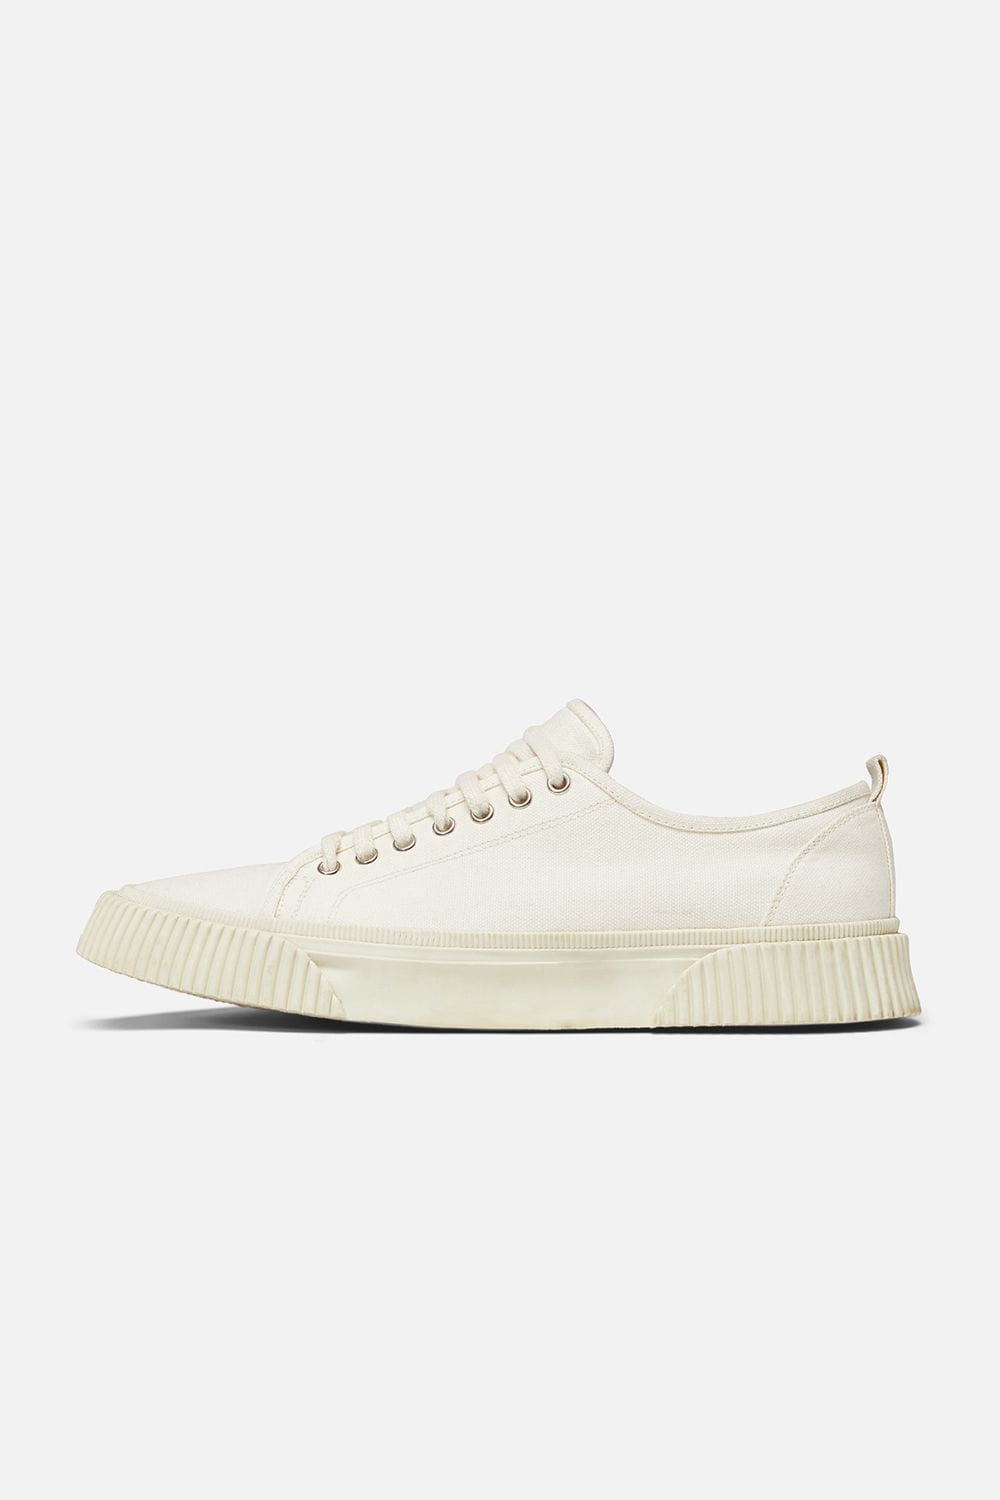 ami-paris-low-top-sneakers-with-textured-sole_15686685_33124837_1000.jpg